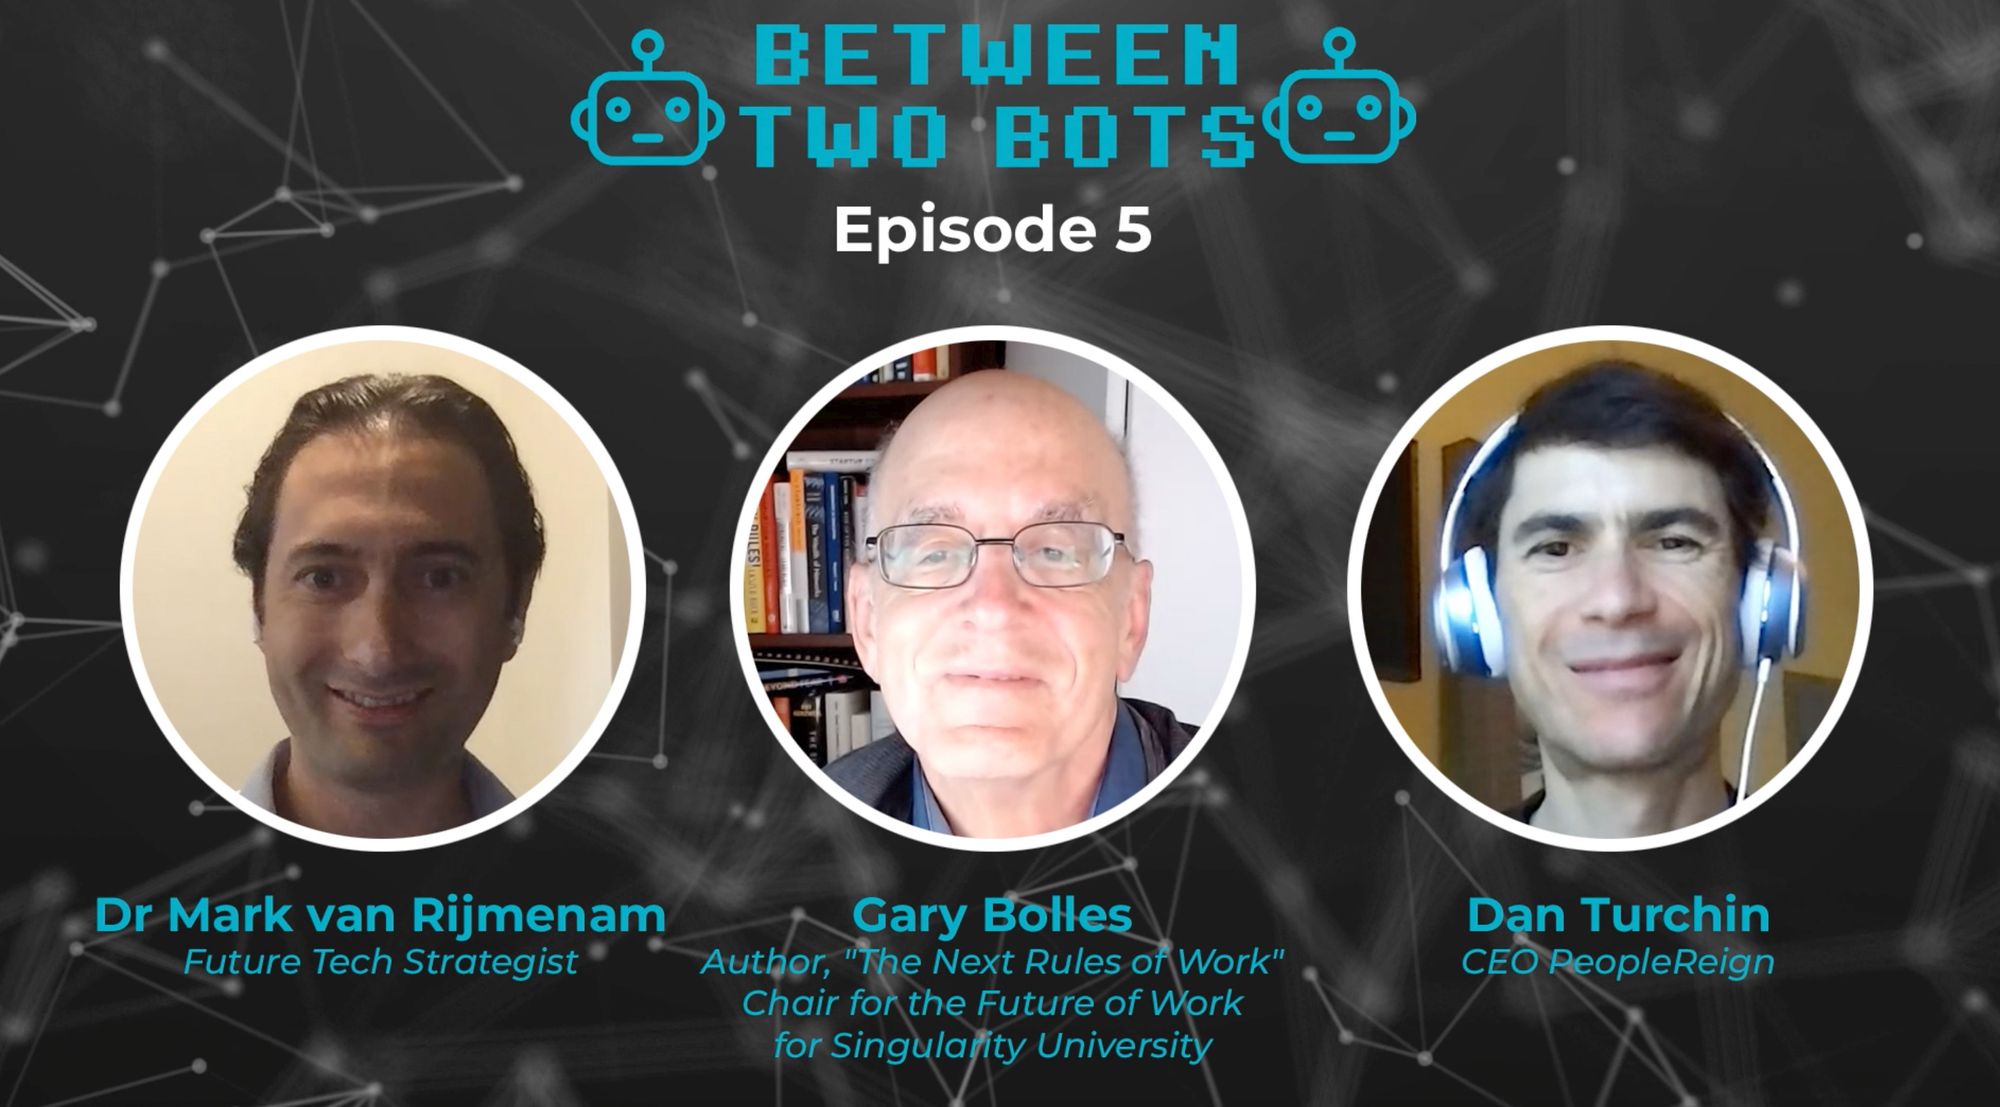 EP05 - Between Two Bots with Gary Bolles